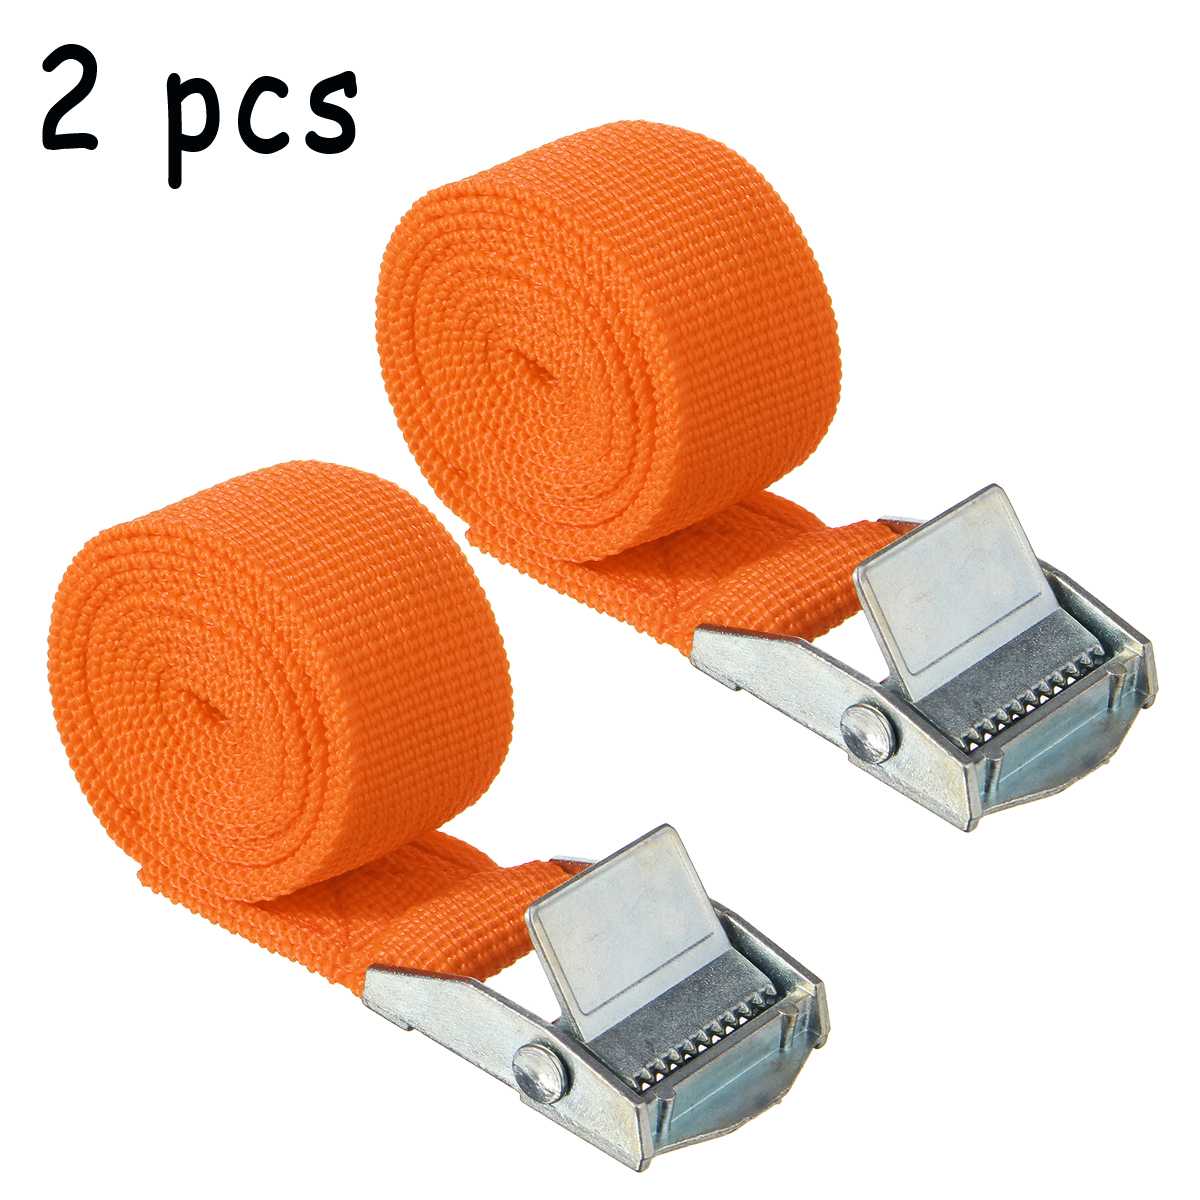 2x Tie Down Strap Strong Nylon Belt Luggage Bag Cargo Lashing With Metal Buckle. 